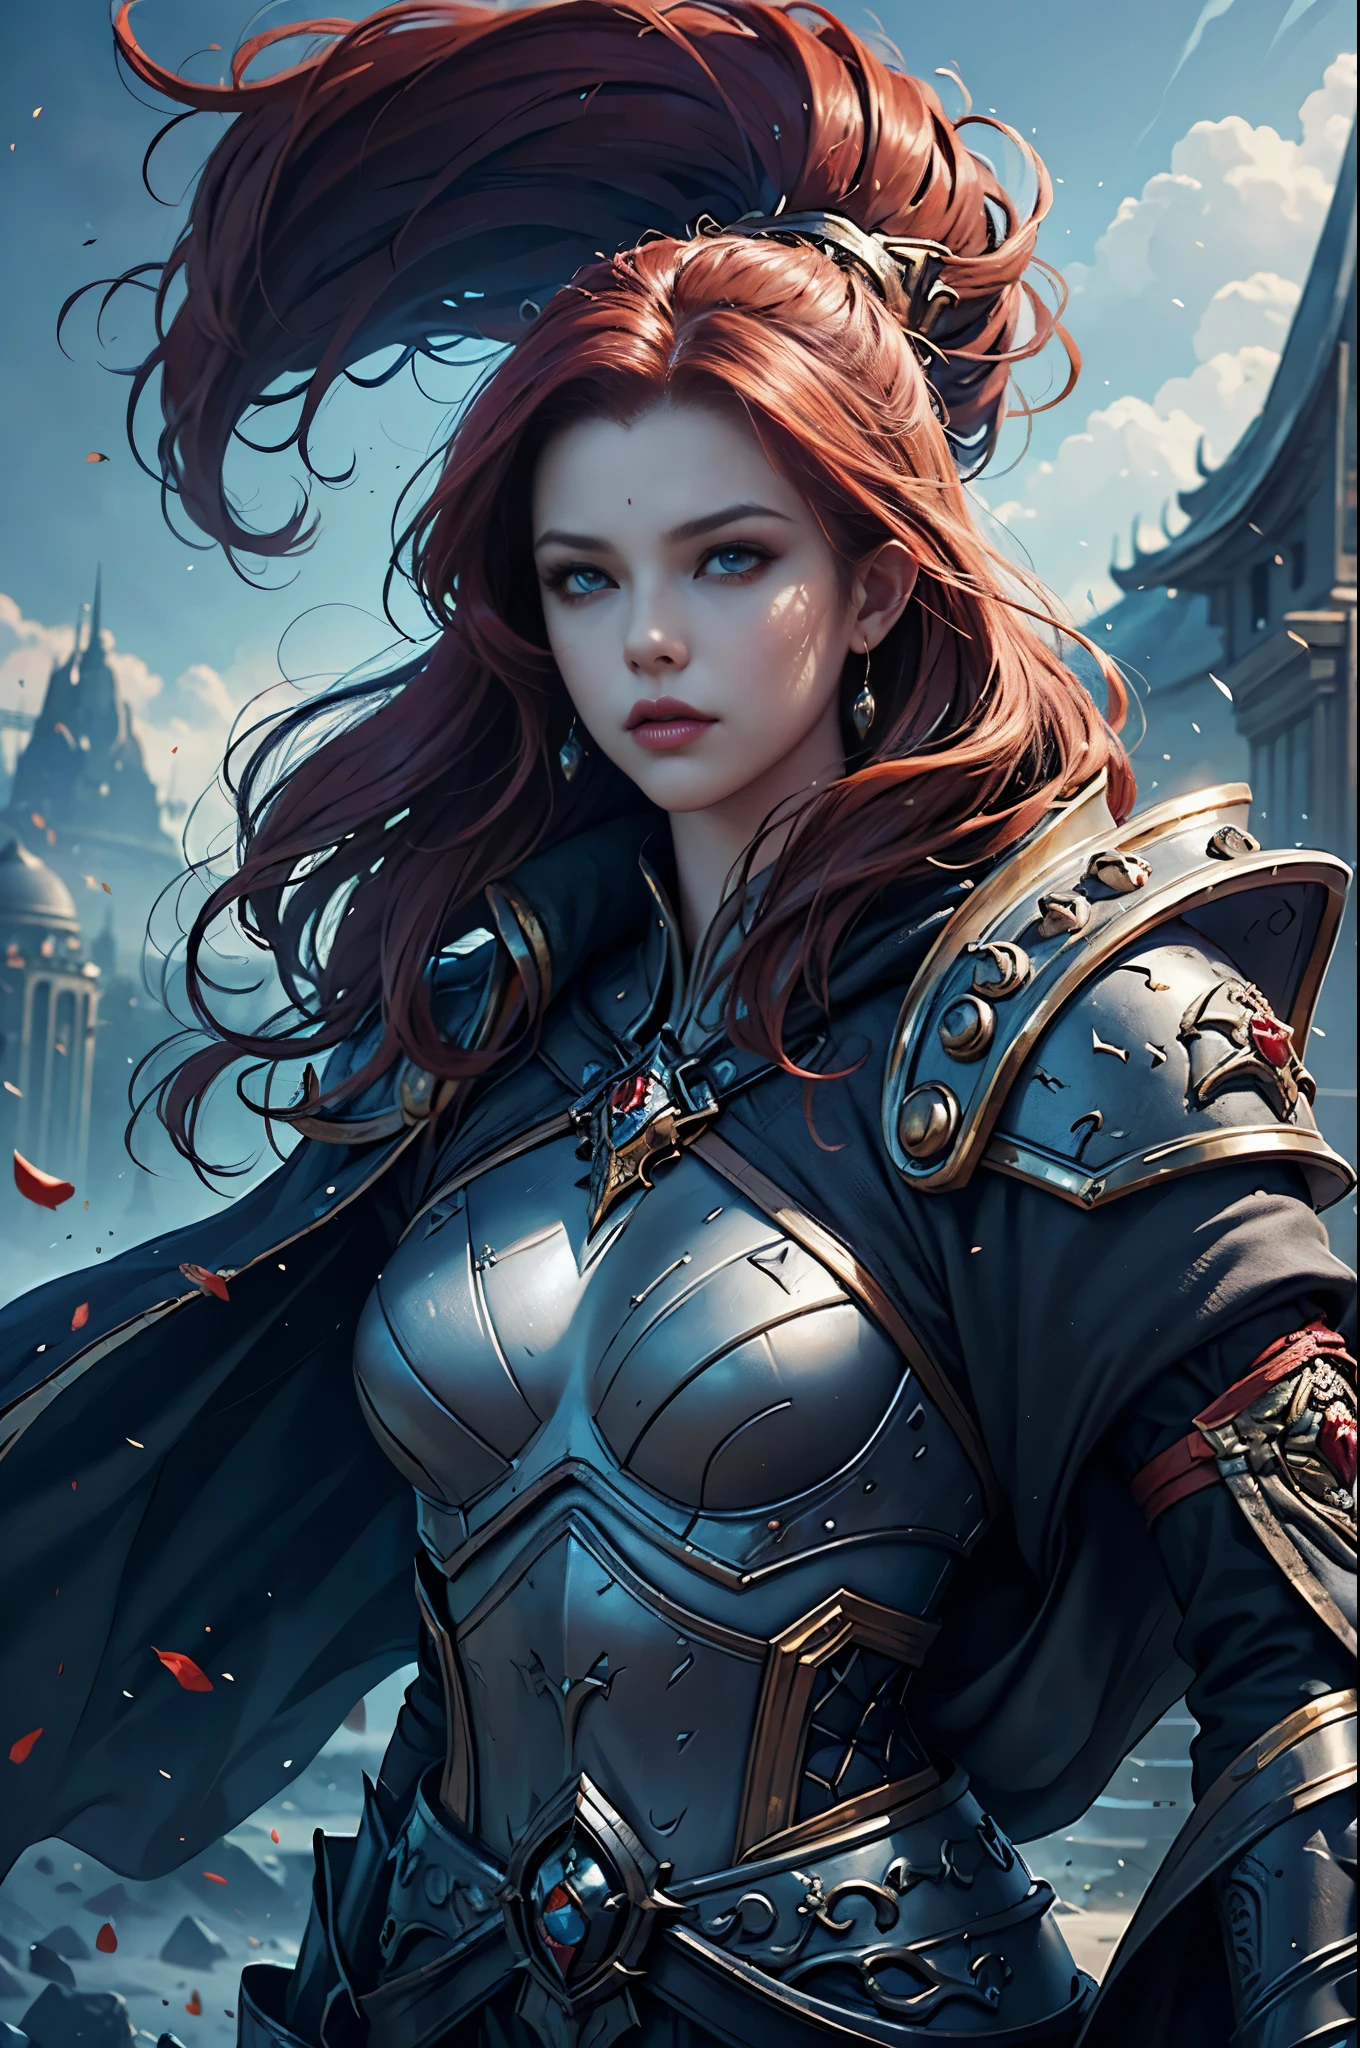 Arab woman in black and red armor holding a, a character portrait by Yang J, cg society contest winner, Fantasy Art, epic exquisite character art, Stunning character art, redhead queen in heavy red armor, 2. 5 d cgi anime fantasy artwork, epic fantasy art style, ig model | ArtGerm, epic fantasy digital art style, Battlefield Commander, Invincible female general, brave, Awe-inspiring Hall々, extremely detailed and beautiful eyes, perfect supermodel body, Cloak wrapped in the wind, Battle Master, Veteran Warrior, incarnation of athena, Best Quality, Perfect Angle, perfect-composition, Best Shots, Official art, ciinematic light